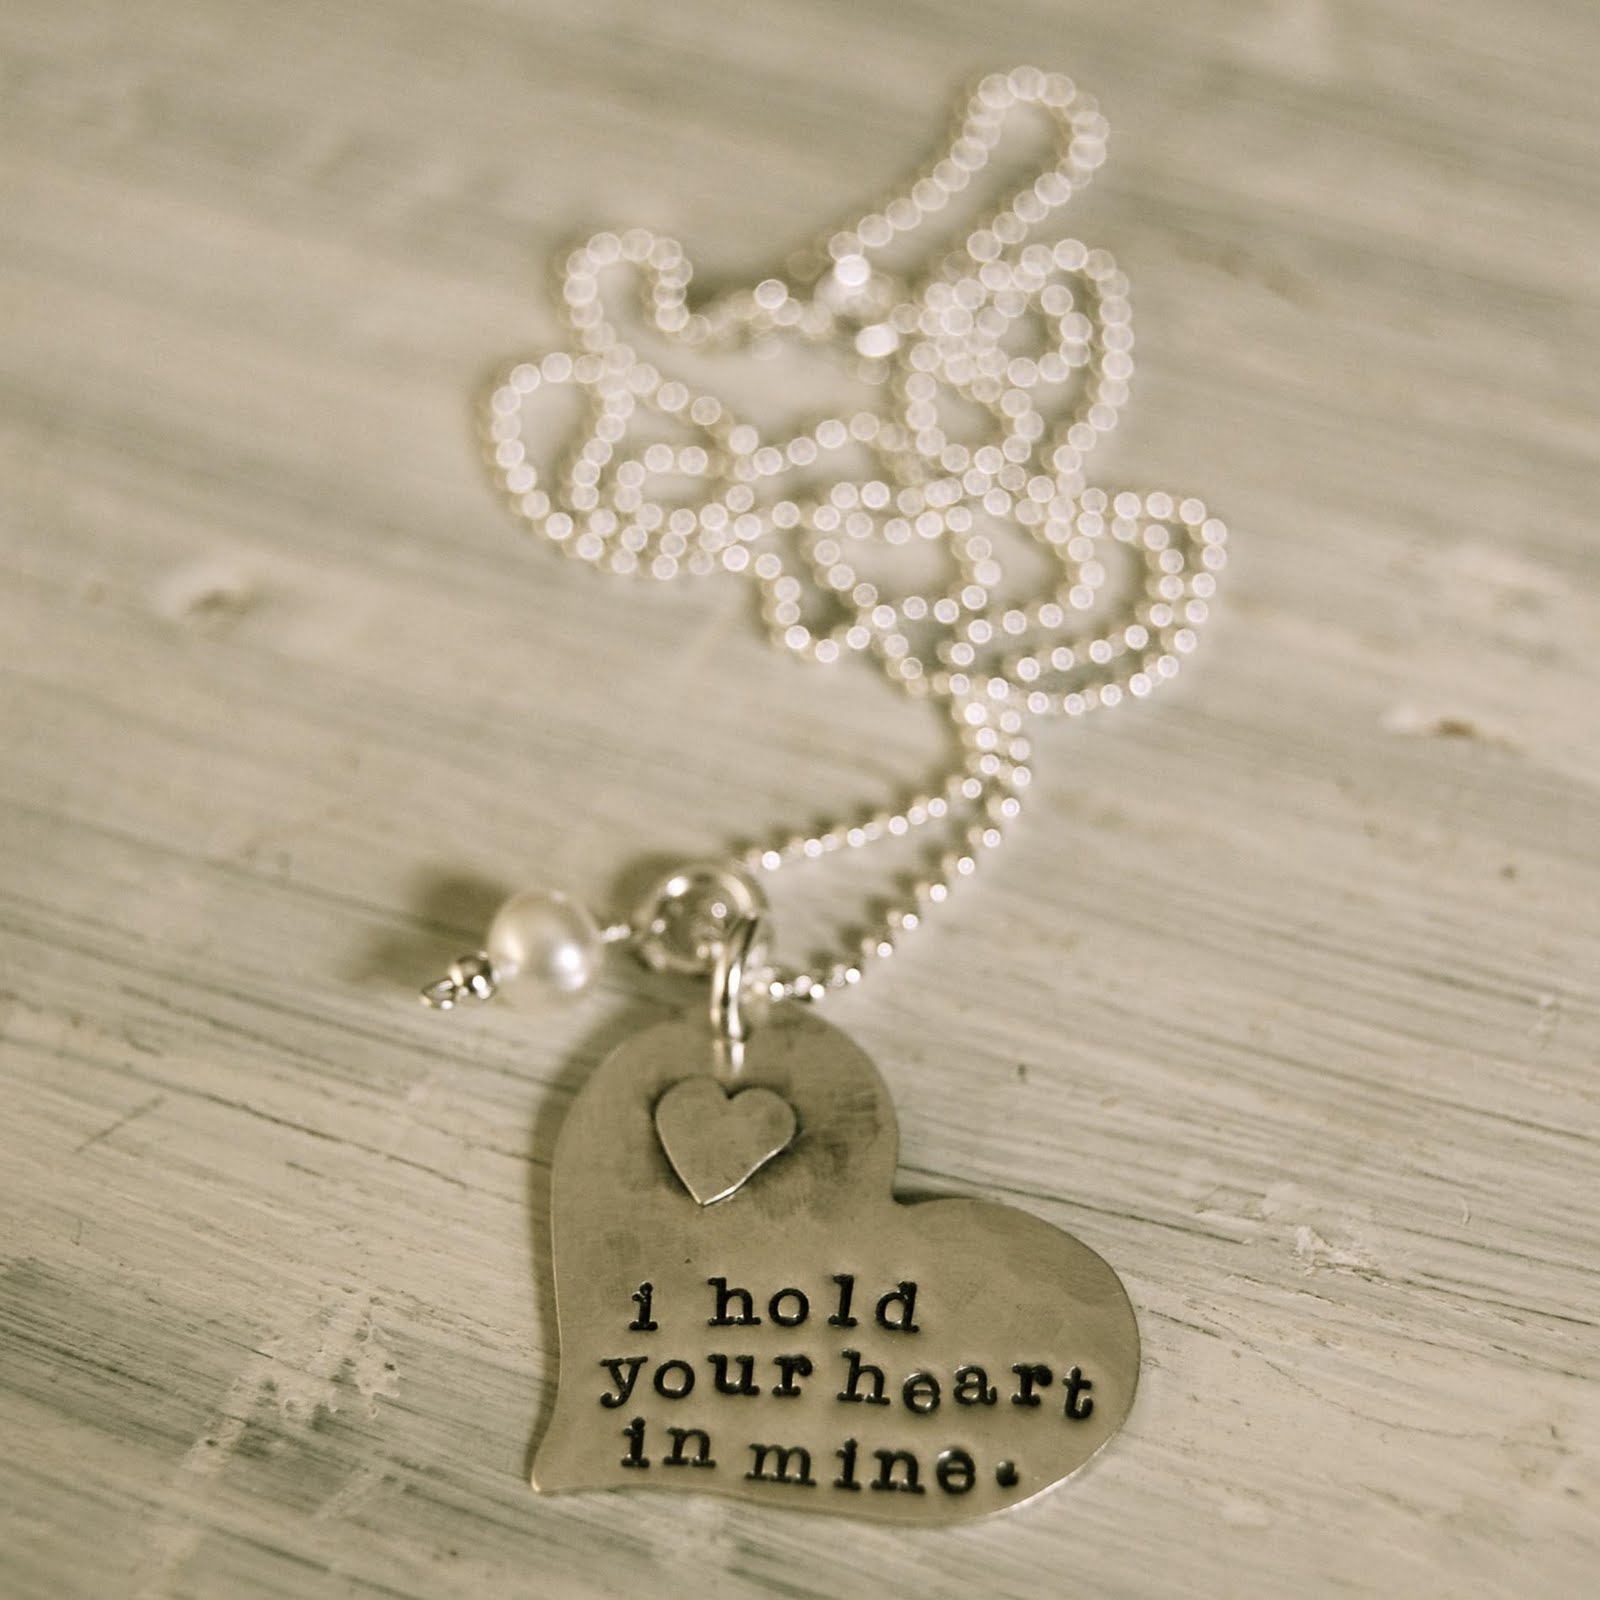 This is your heart. I carry your Heart with me браслет. Heart Necklace. Hold your Heart. Your Hearts are mine душа моя.